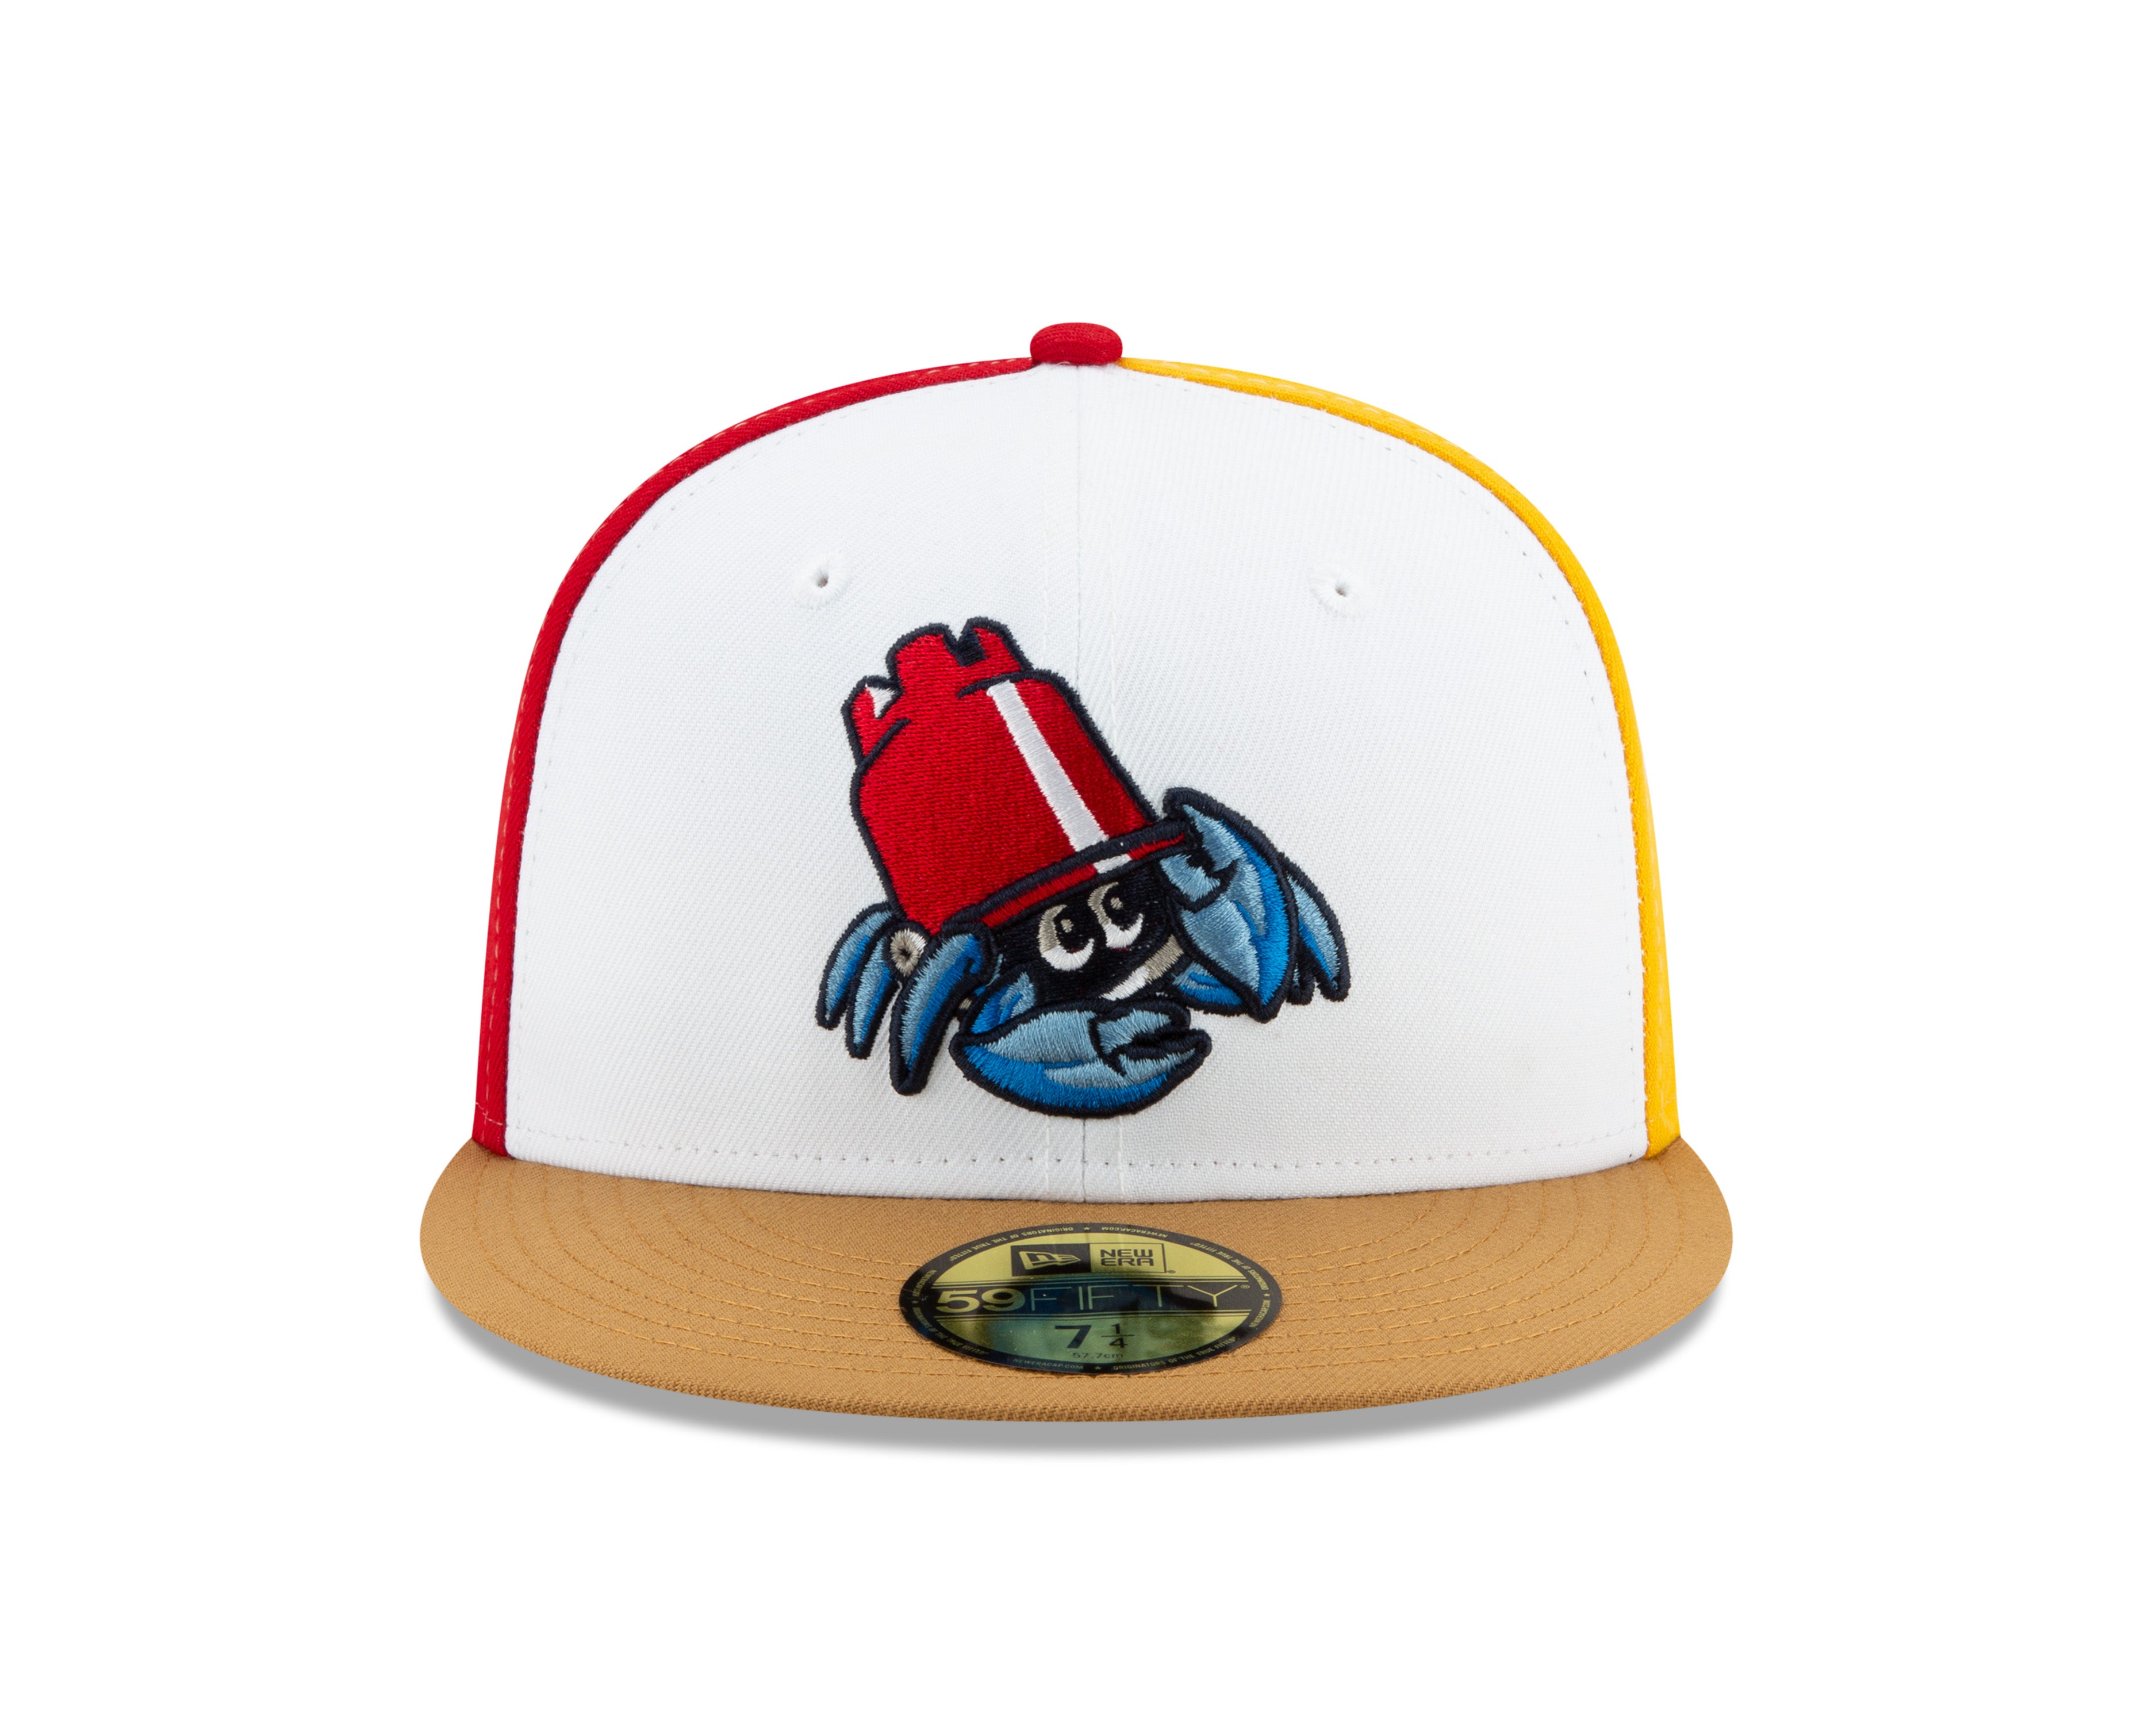 Lakewood Blueclaws Authentic Collection 59FIFTY Fitted Hat, Red - Size: 7 5/8, Milb by New Era